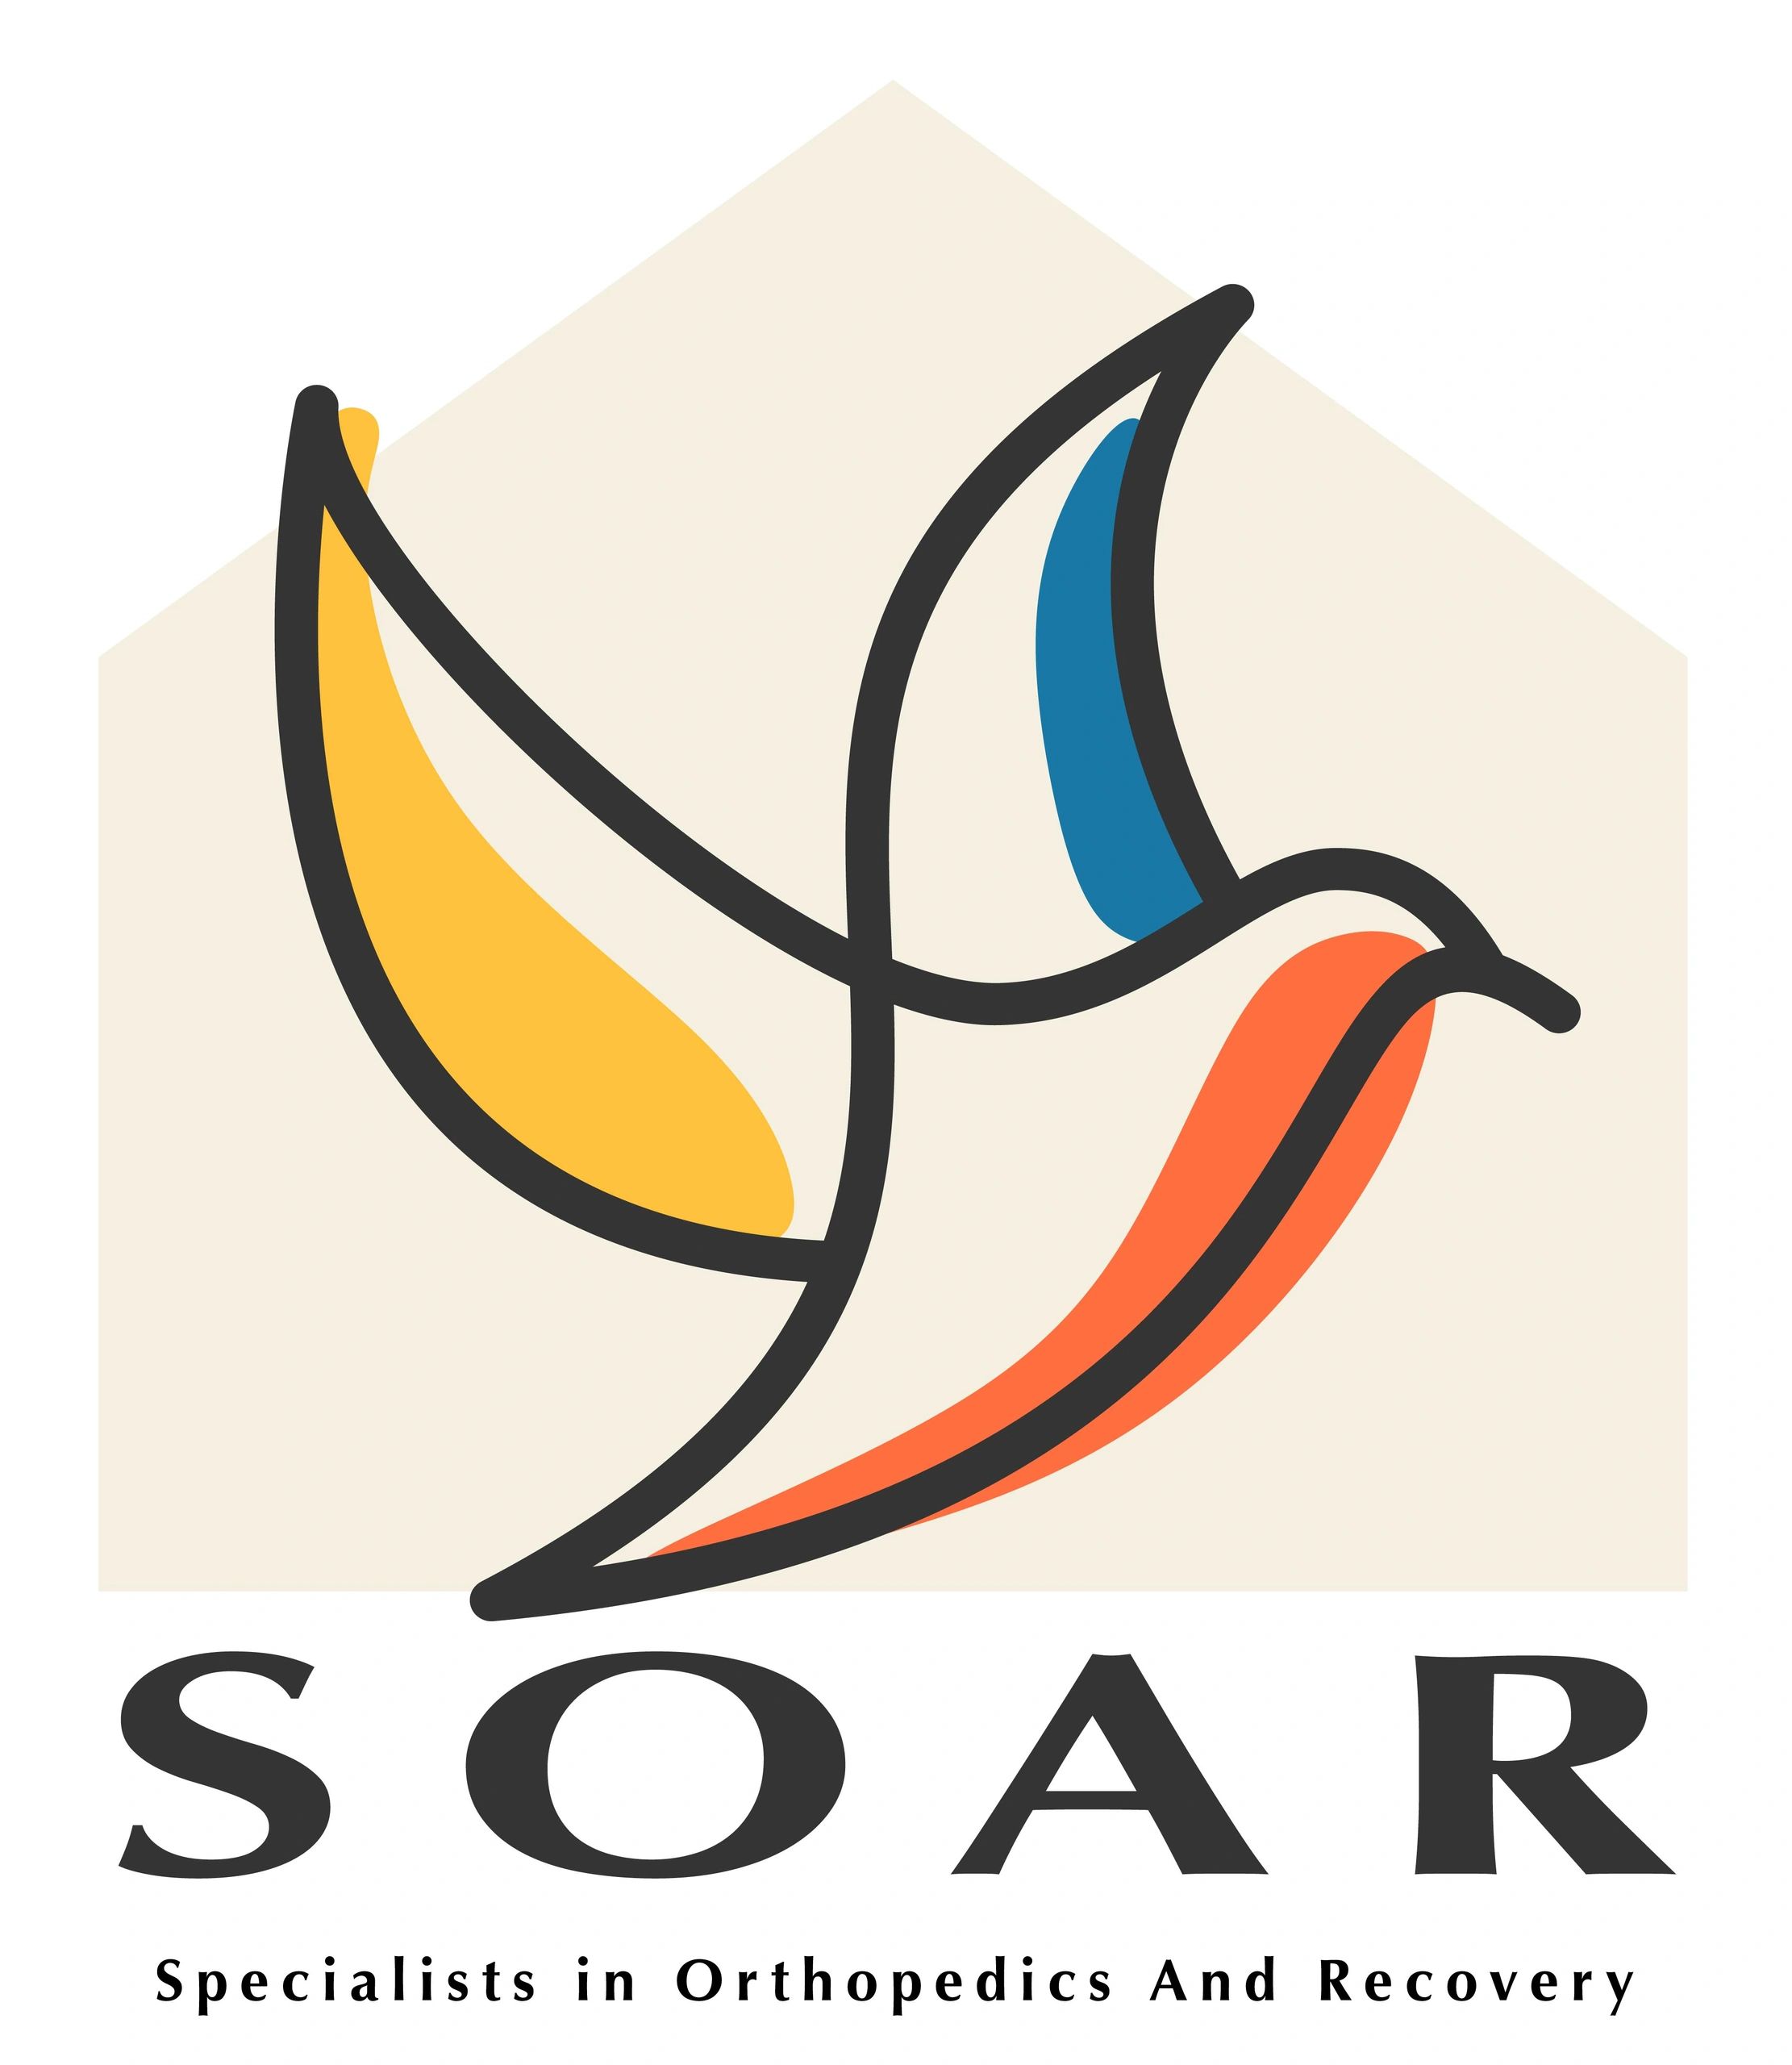 SOAR - Specialists in Orthopedics And Recovery